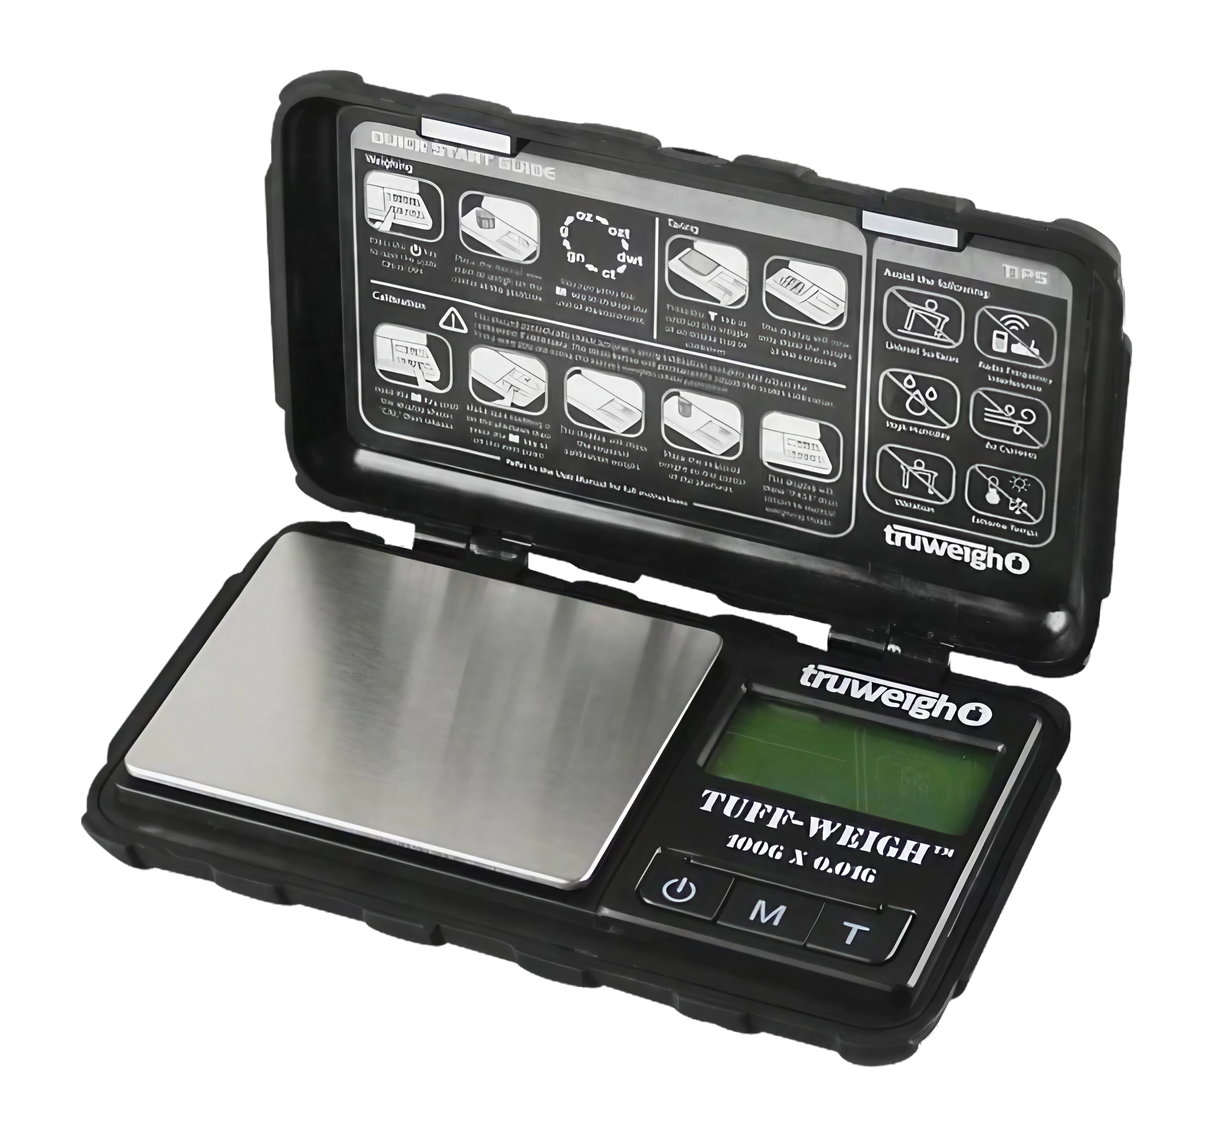 Truweigh Tuff-Weigh Mini Scale in Black, 100g x 0.01g, open view showing digital display and instructions